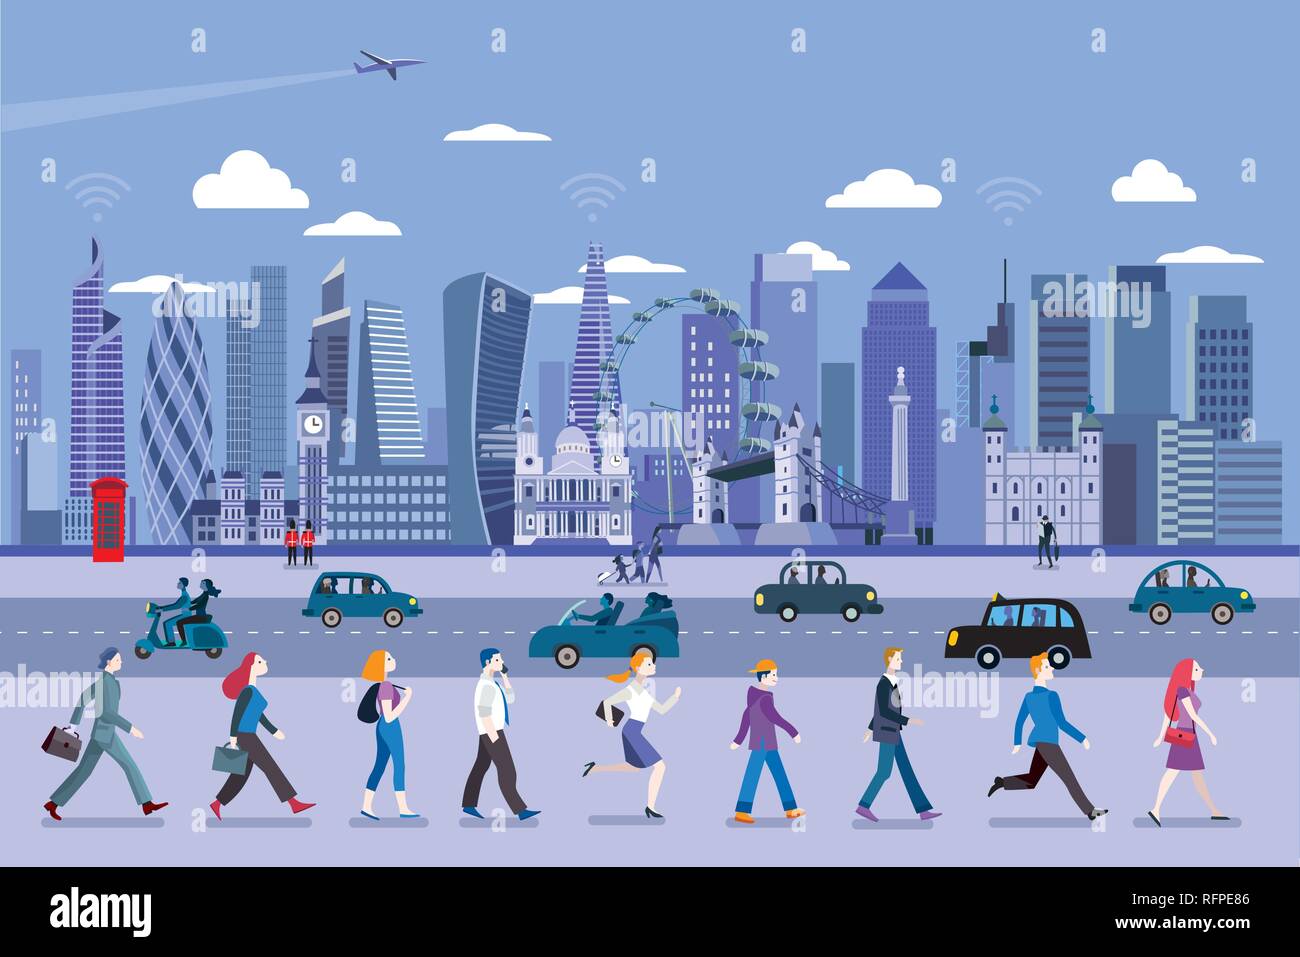 London street with people walking and the City Skyline at the background. Flat vector illustration. Stock Vector